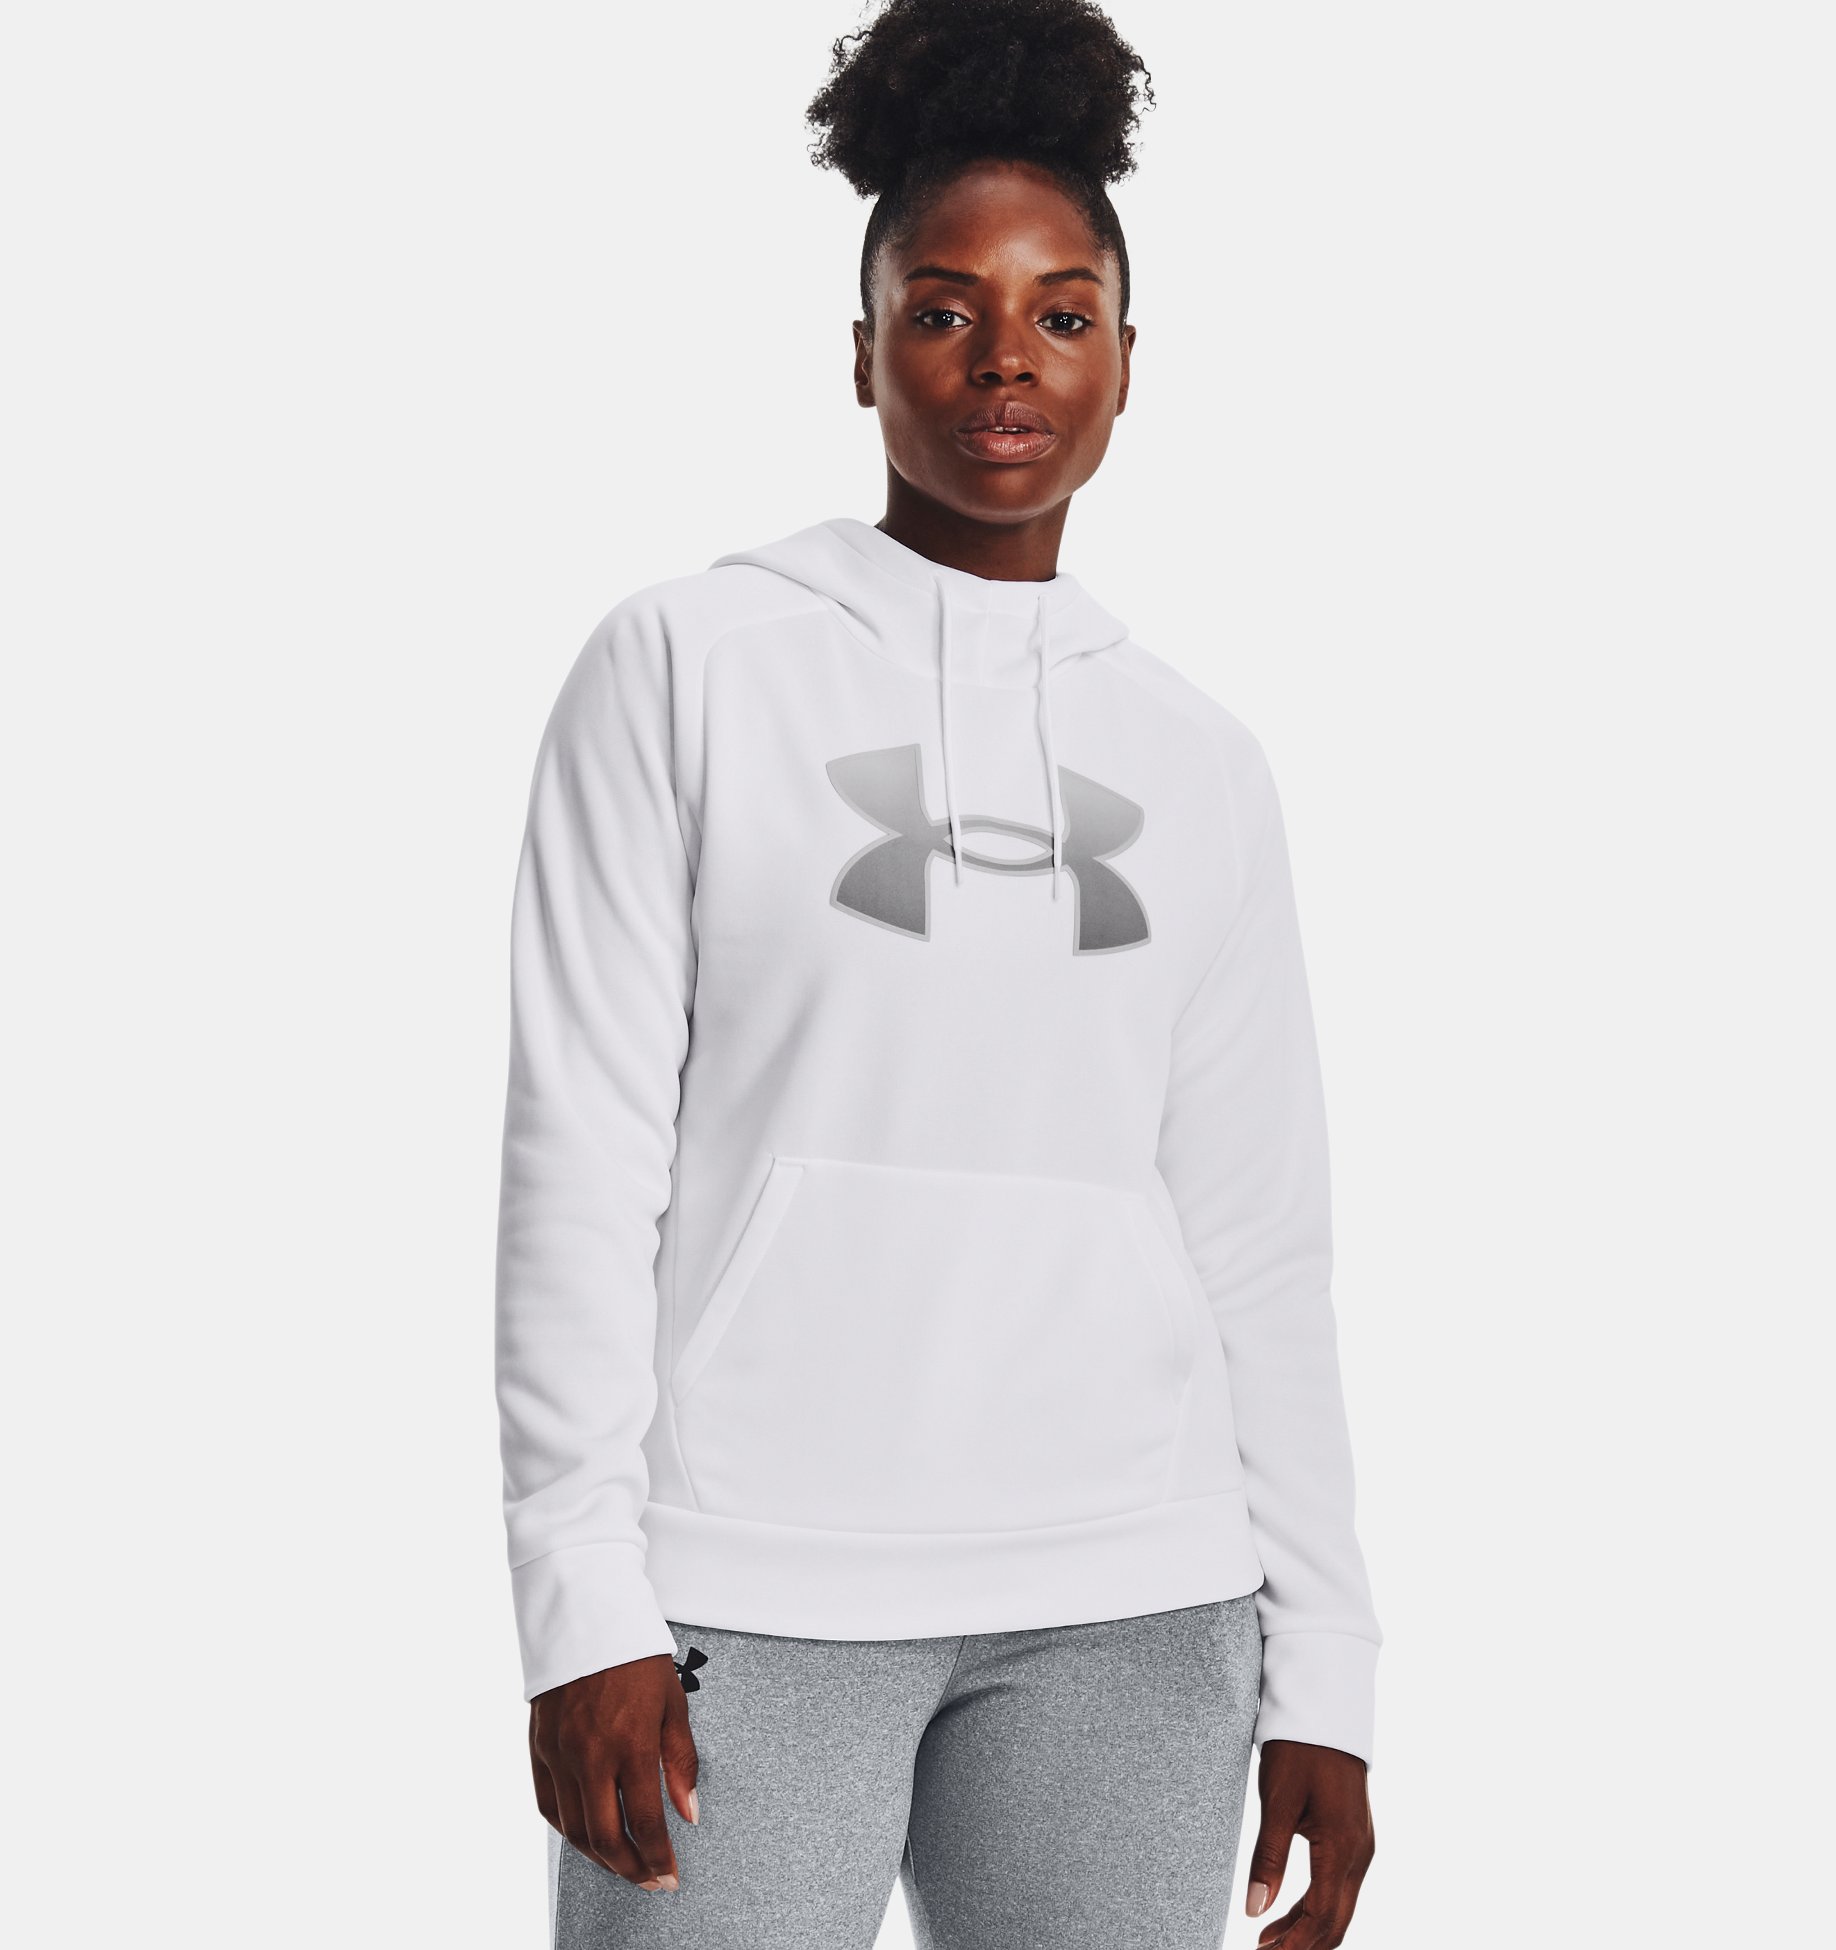 Under Armour Women's Fleece Hoodie (white or league red only) $14 + free shipping